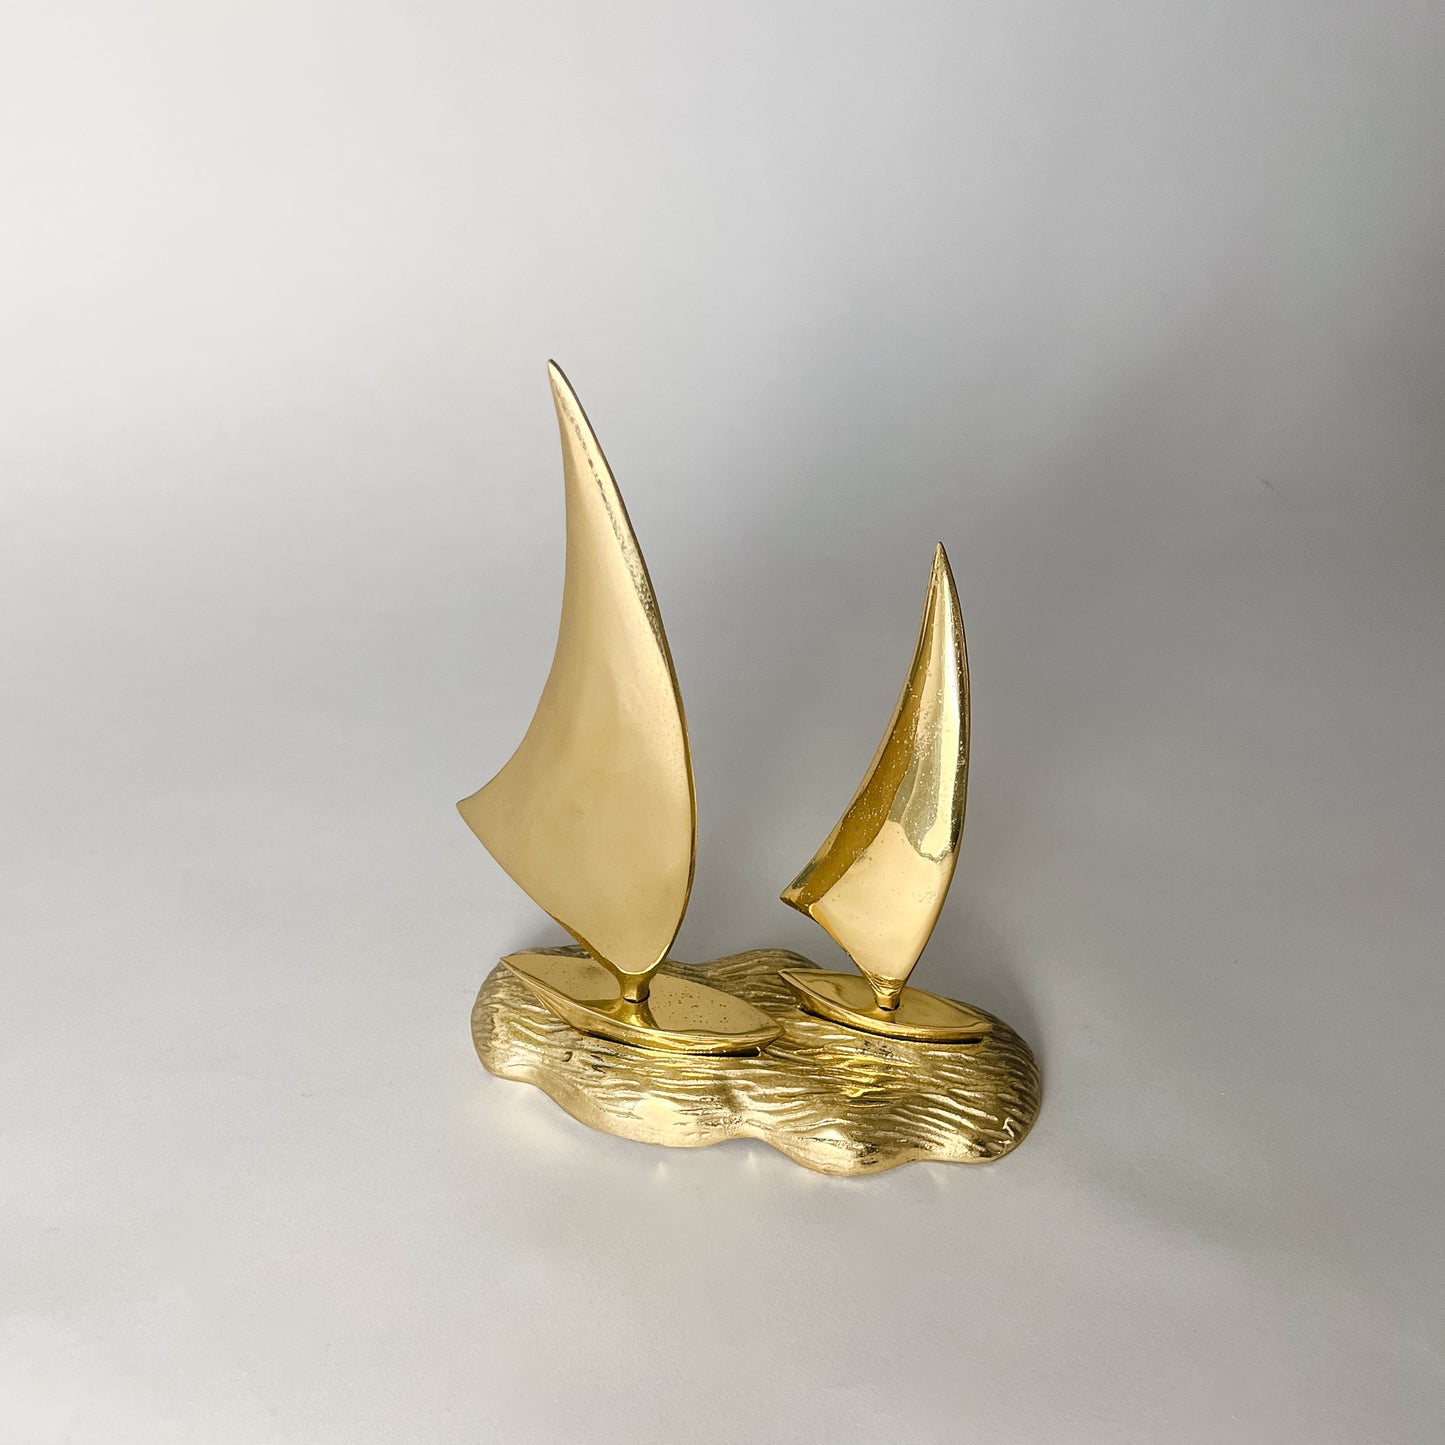 brass boats on water